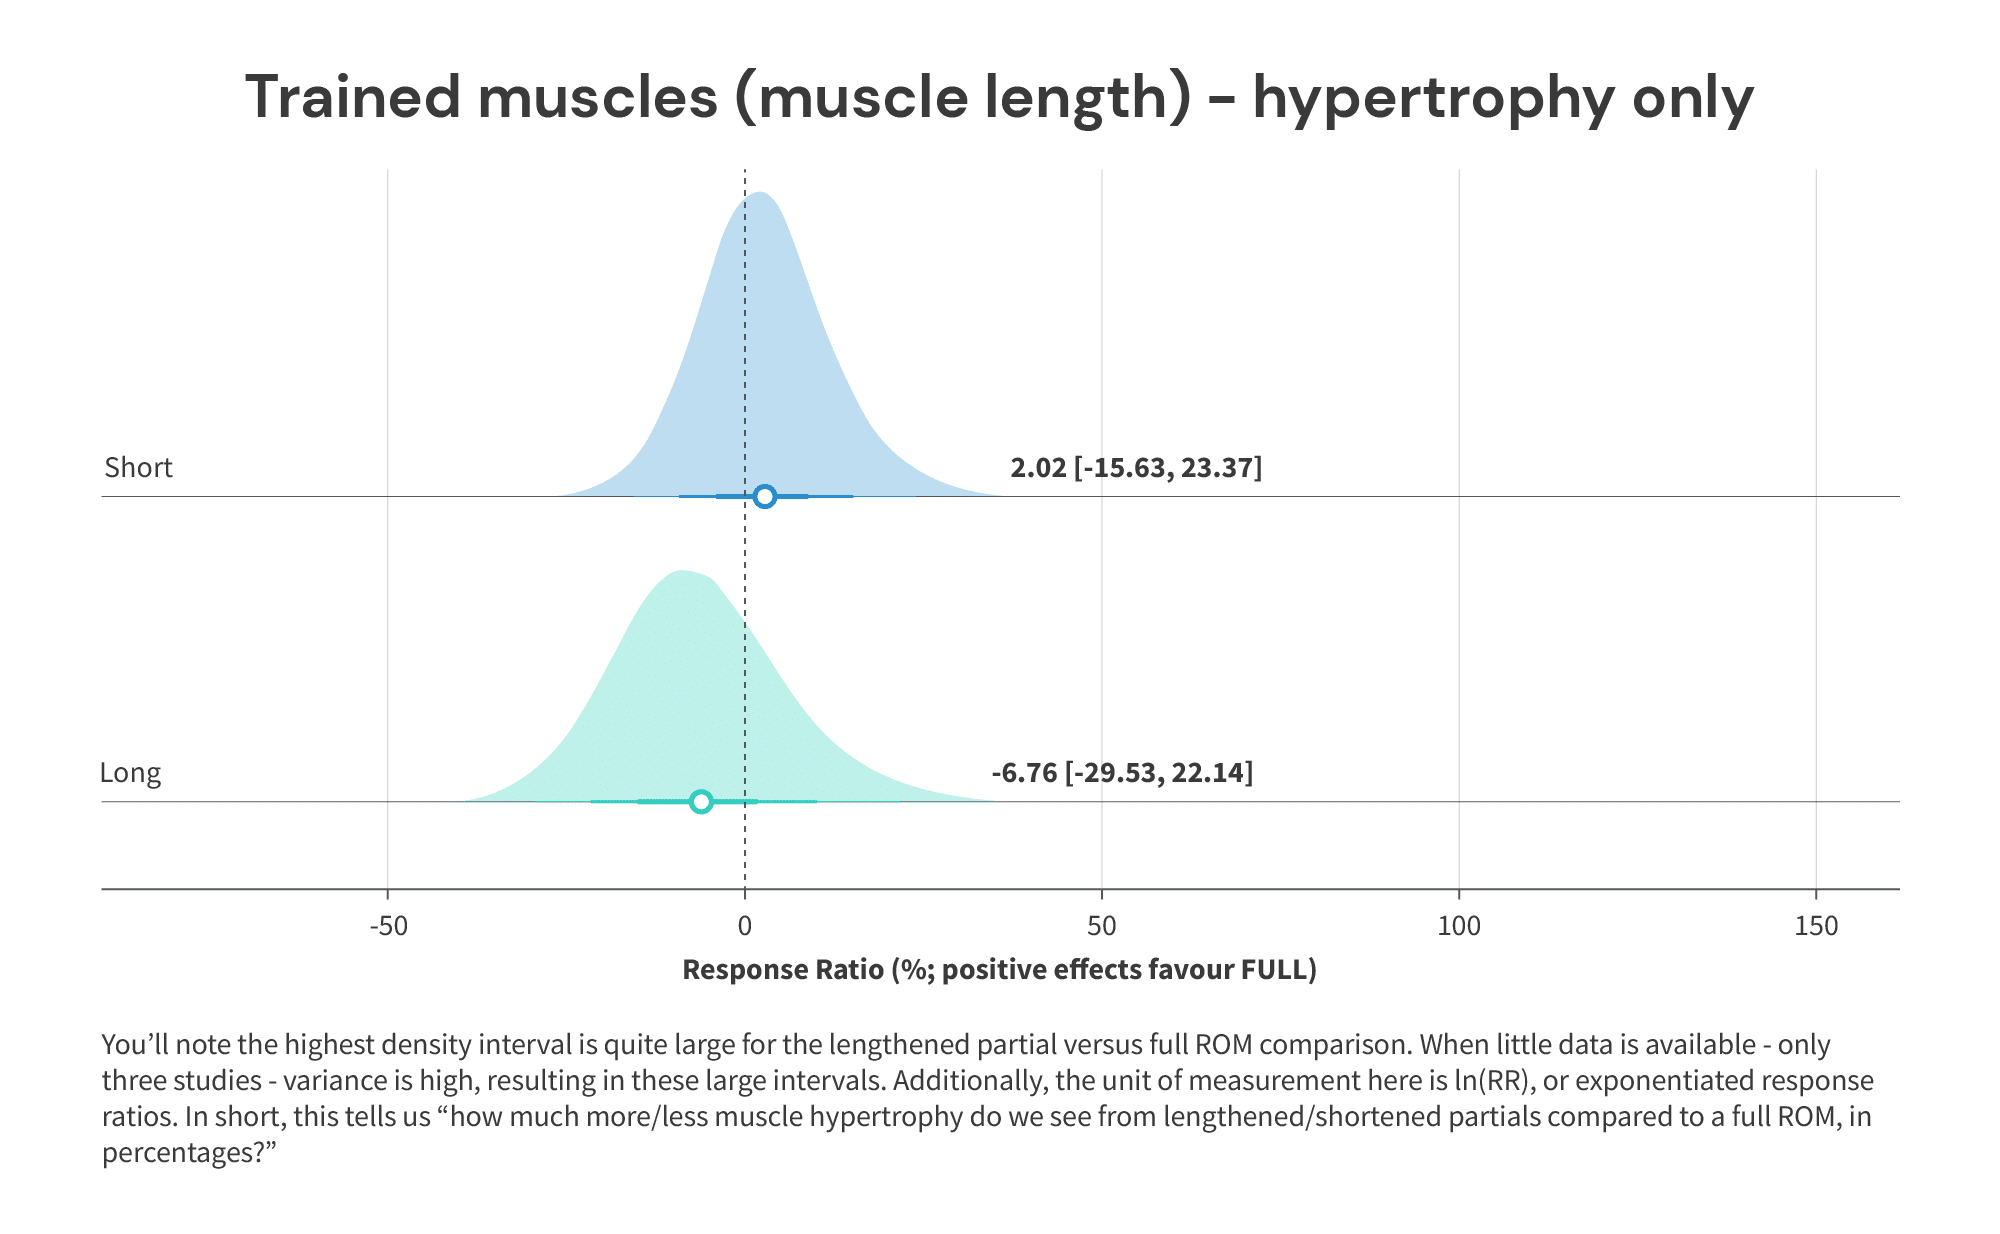 trained muscles (muscle length) - hypertrophy only